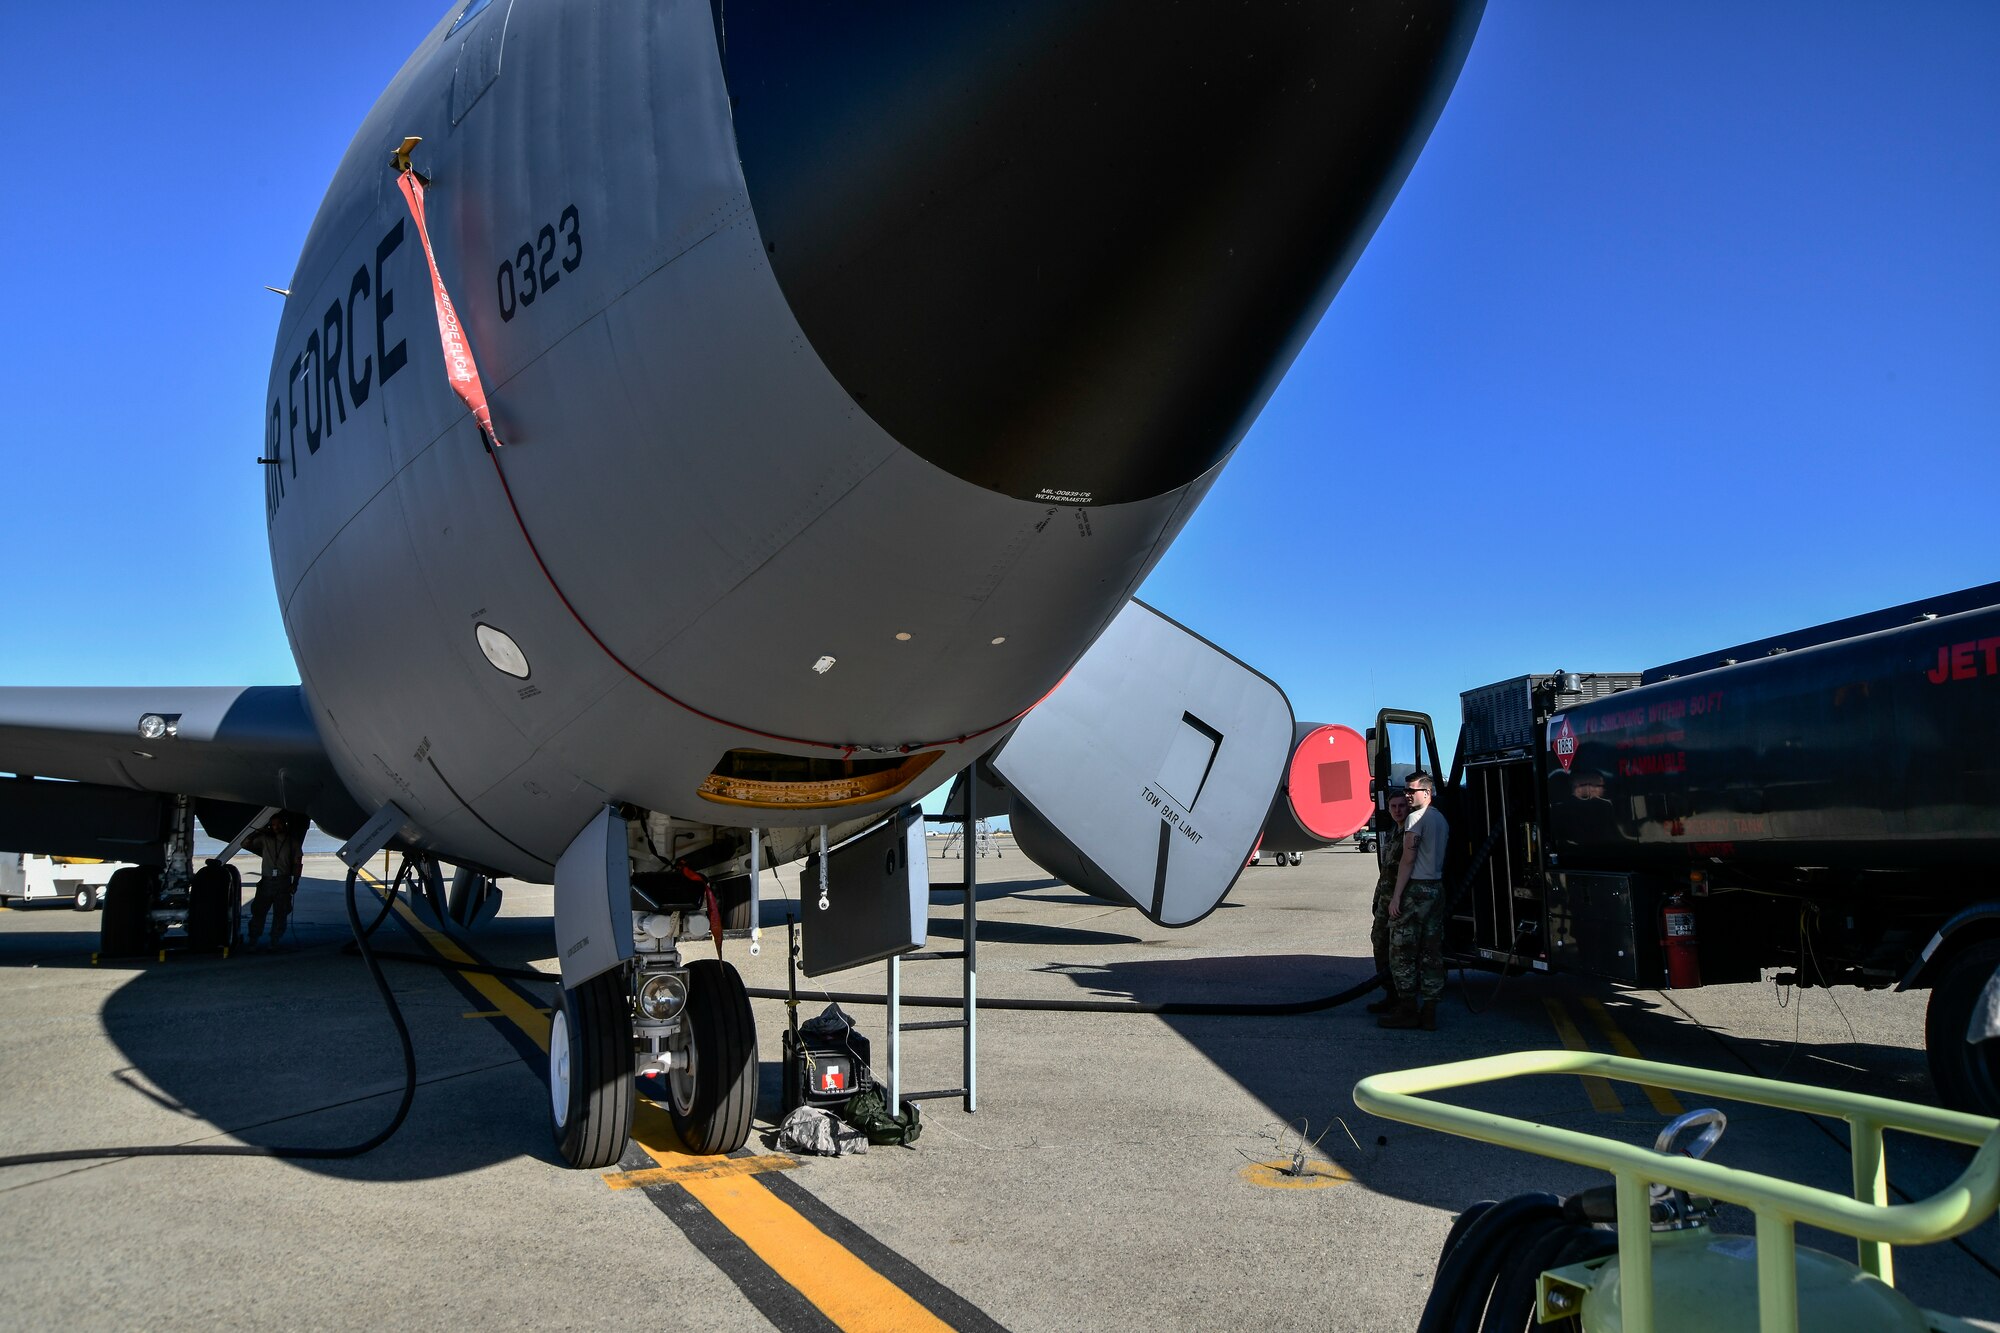 Airmen from the 9th Logistics Readiness Squadron Petroleum, Oil and Lubricants flight and 940th Aircraft Maintenance Squadron work together during a refueling exercise September 6, 2019 at Beale Air Force Base, California. (U.S. Air Force photo by Tech. Sgt. Alexandre Montes)